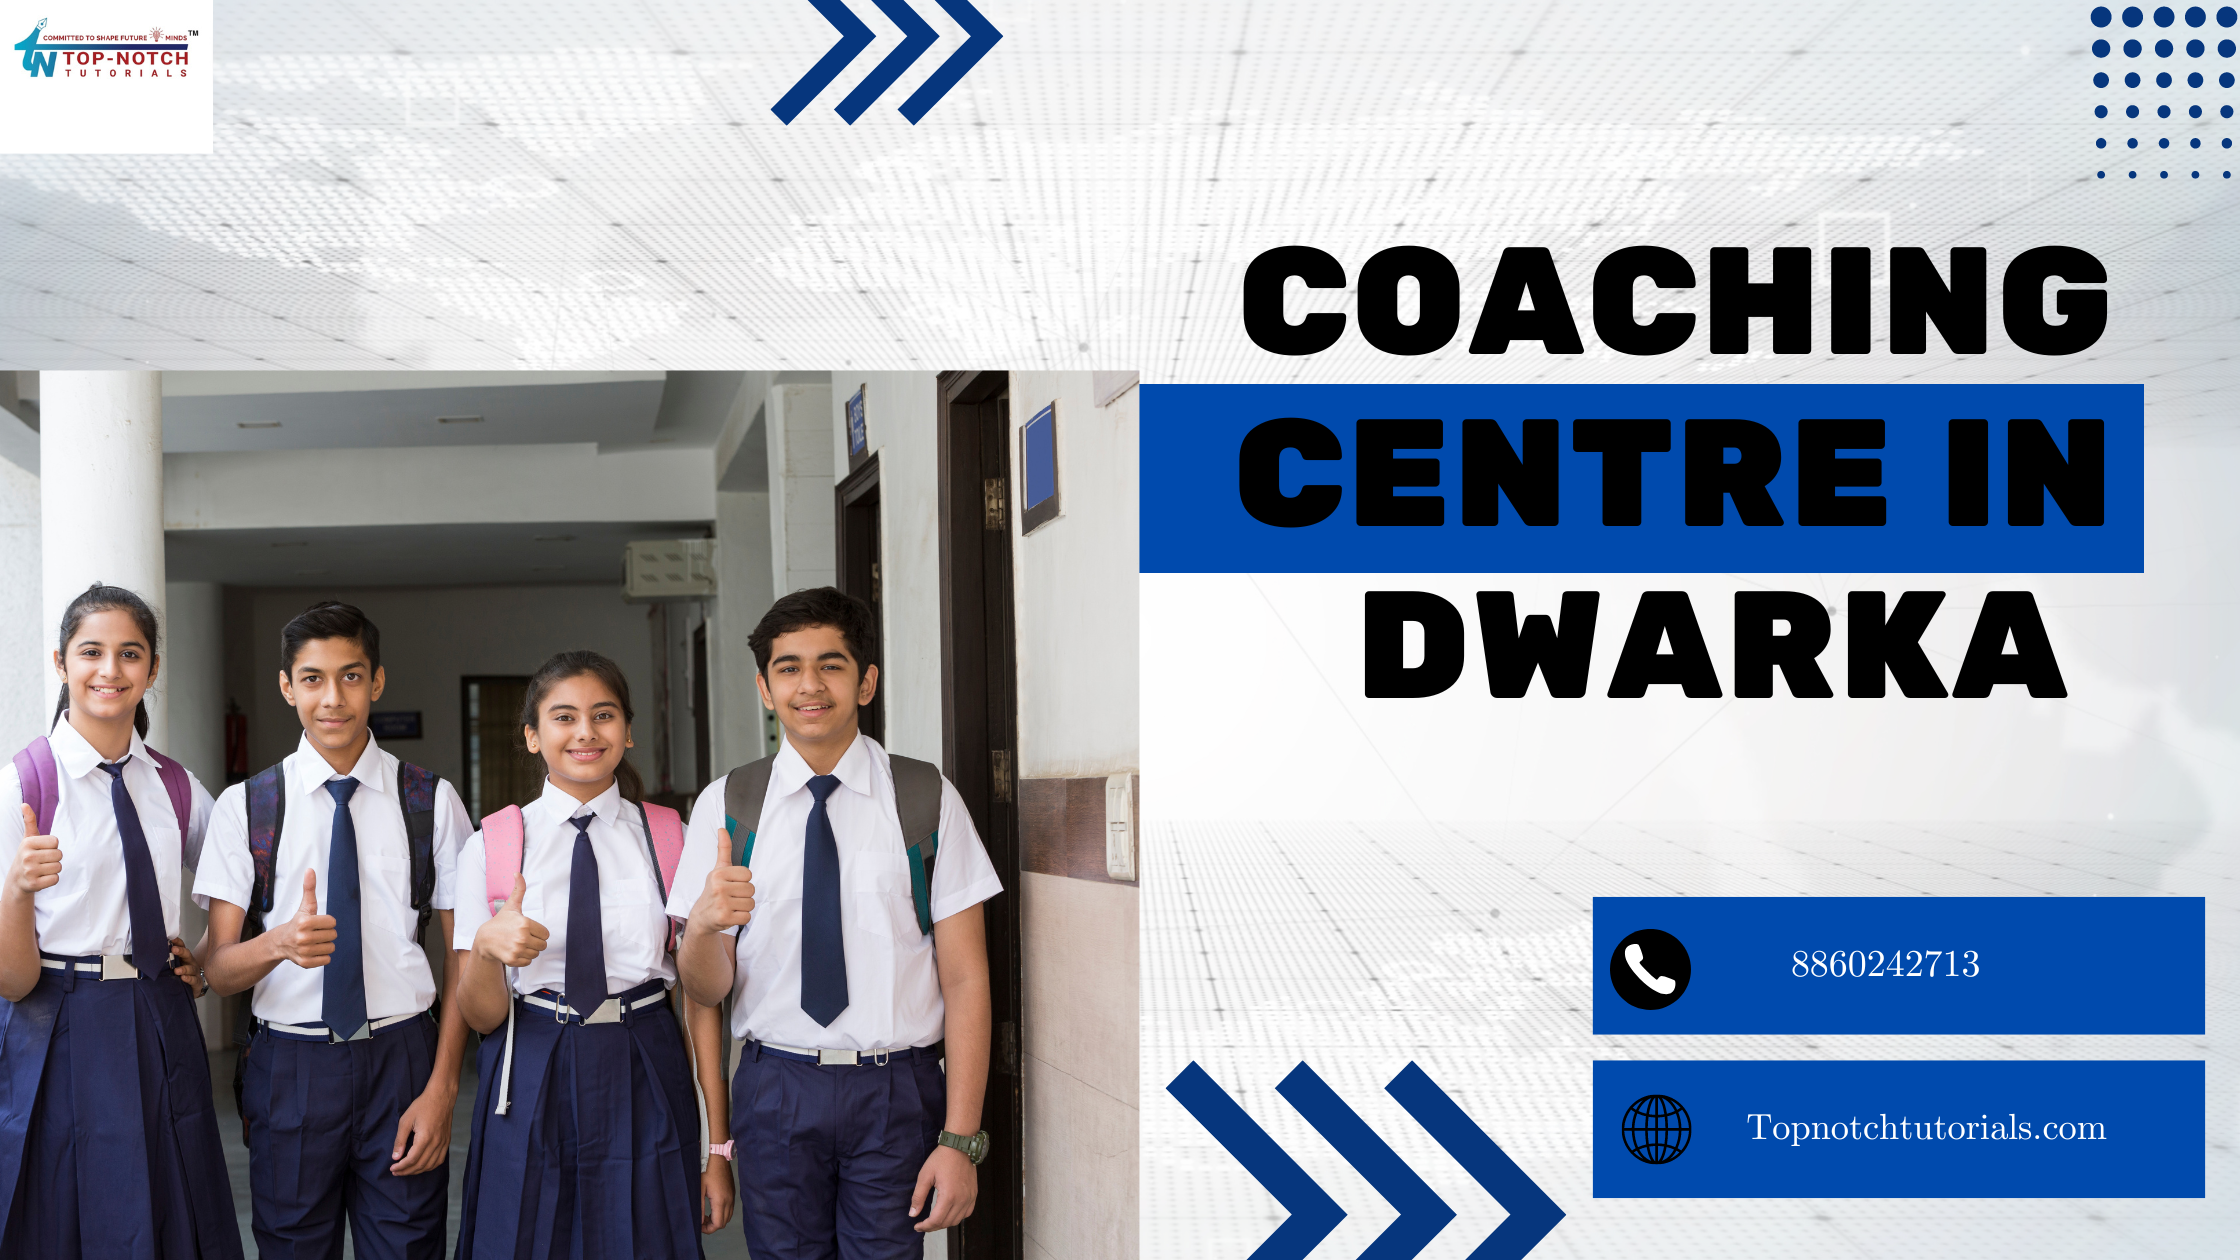 Benefits of Coaching Centre in Dwarka